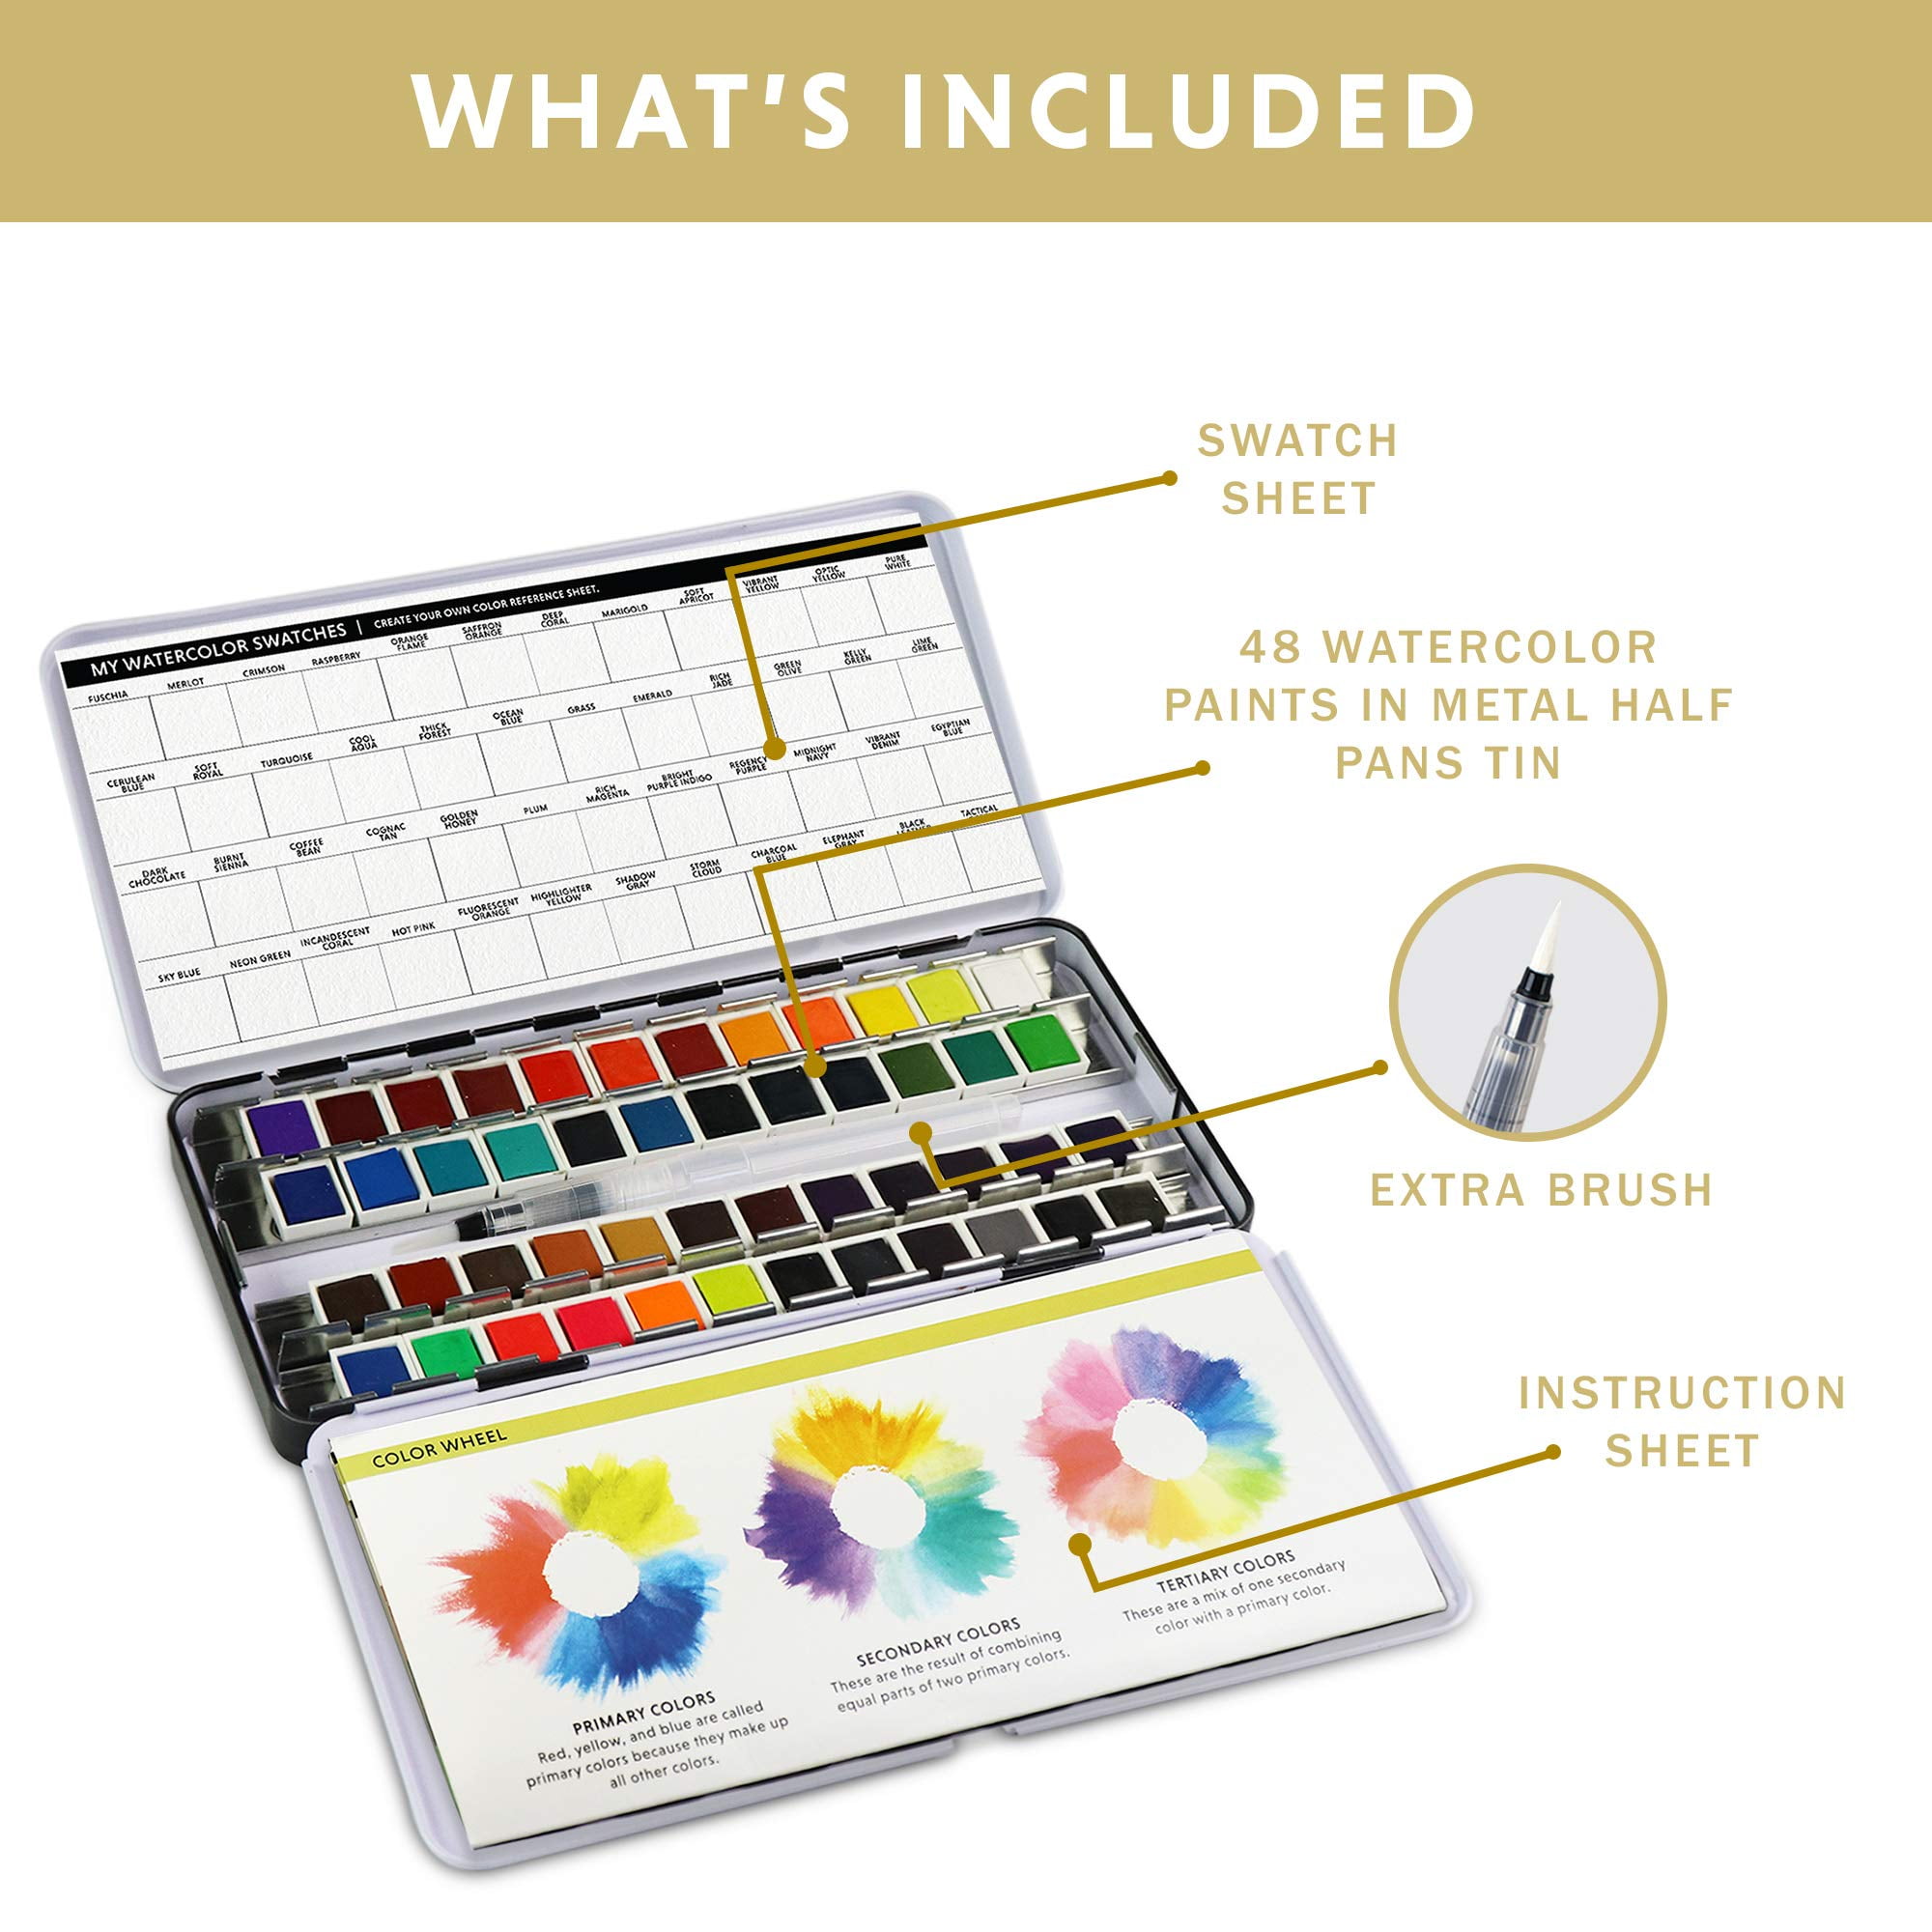 Premium Palette System for Watercolor Artists